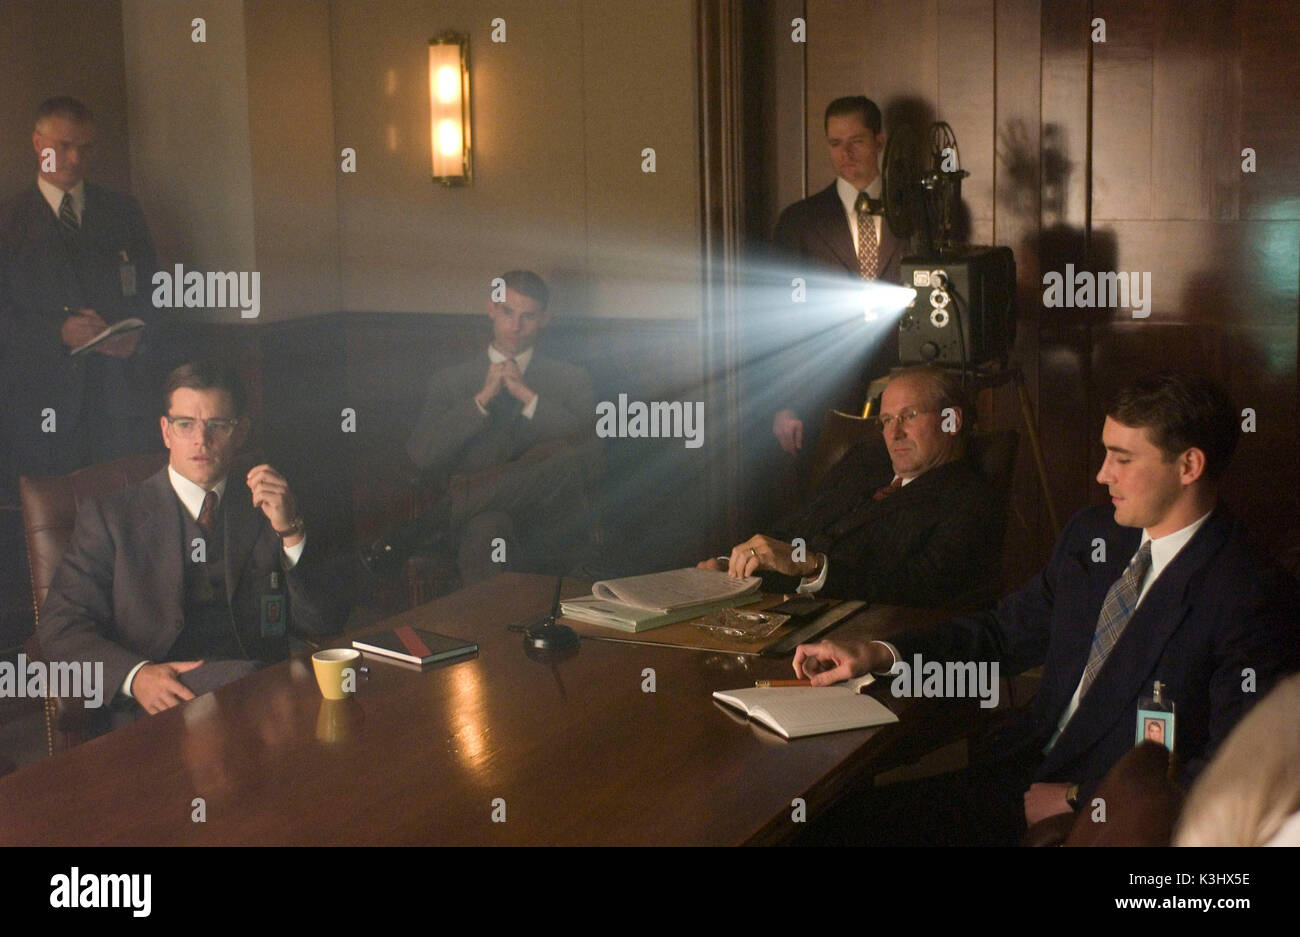 (L to R, foreground) Edward Wilson (MATT DAMON), Director Philip Allen (WILLIAM HURT) and Richard Hayes (LEE PACE) in the untold story of the birth of the CIA, The Good Shepherd. THE GOOD SHEPHERD (L to R, foreground) Edward Wilson (MATT DAMON), Director Philip Allen (WILLIAM HURT) and Richard Hayes (LEE PACE) (L to R, foreground) Edward Wilson (MATT DAMON), Director Philip Allen (WILLIAM HURT) and Richard Hayes (LEE PACE) in the untold story of the birth of the CIA, The Good Shepherd. Stock Photo